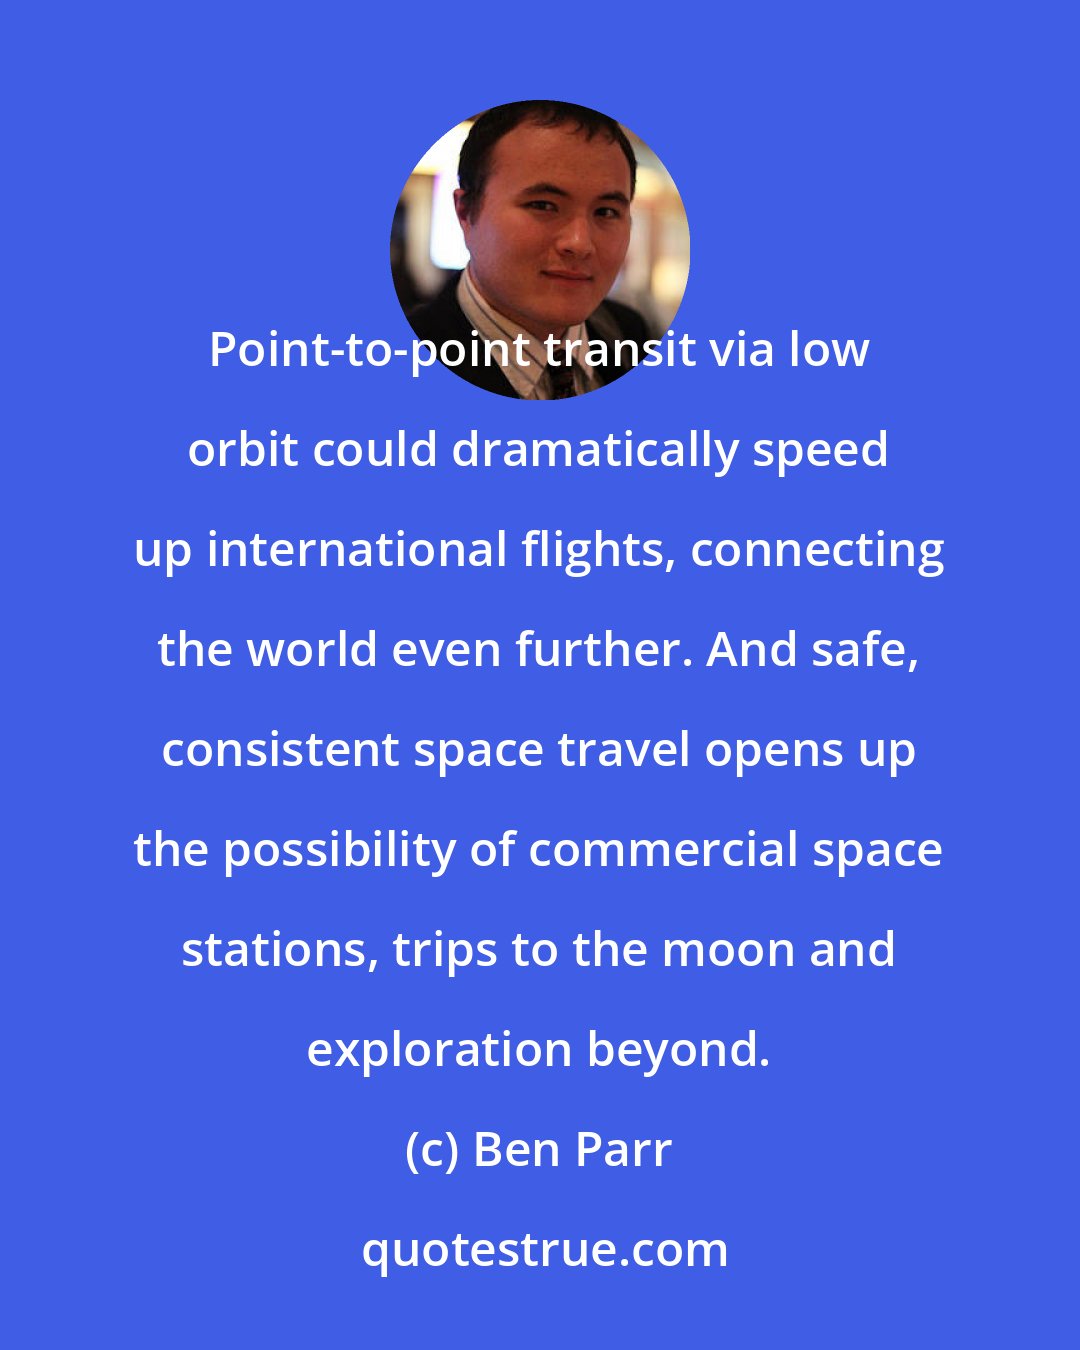 Ben Parr: Point-to-point transit via low orbit could dramatically speed up international flights, connecting the world even further. And safe, consistent space travel opens up the possibility of commercial space stations, trips to the moon and exploration beyond.